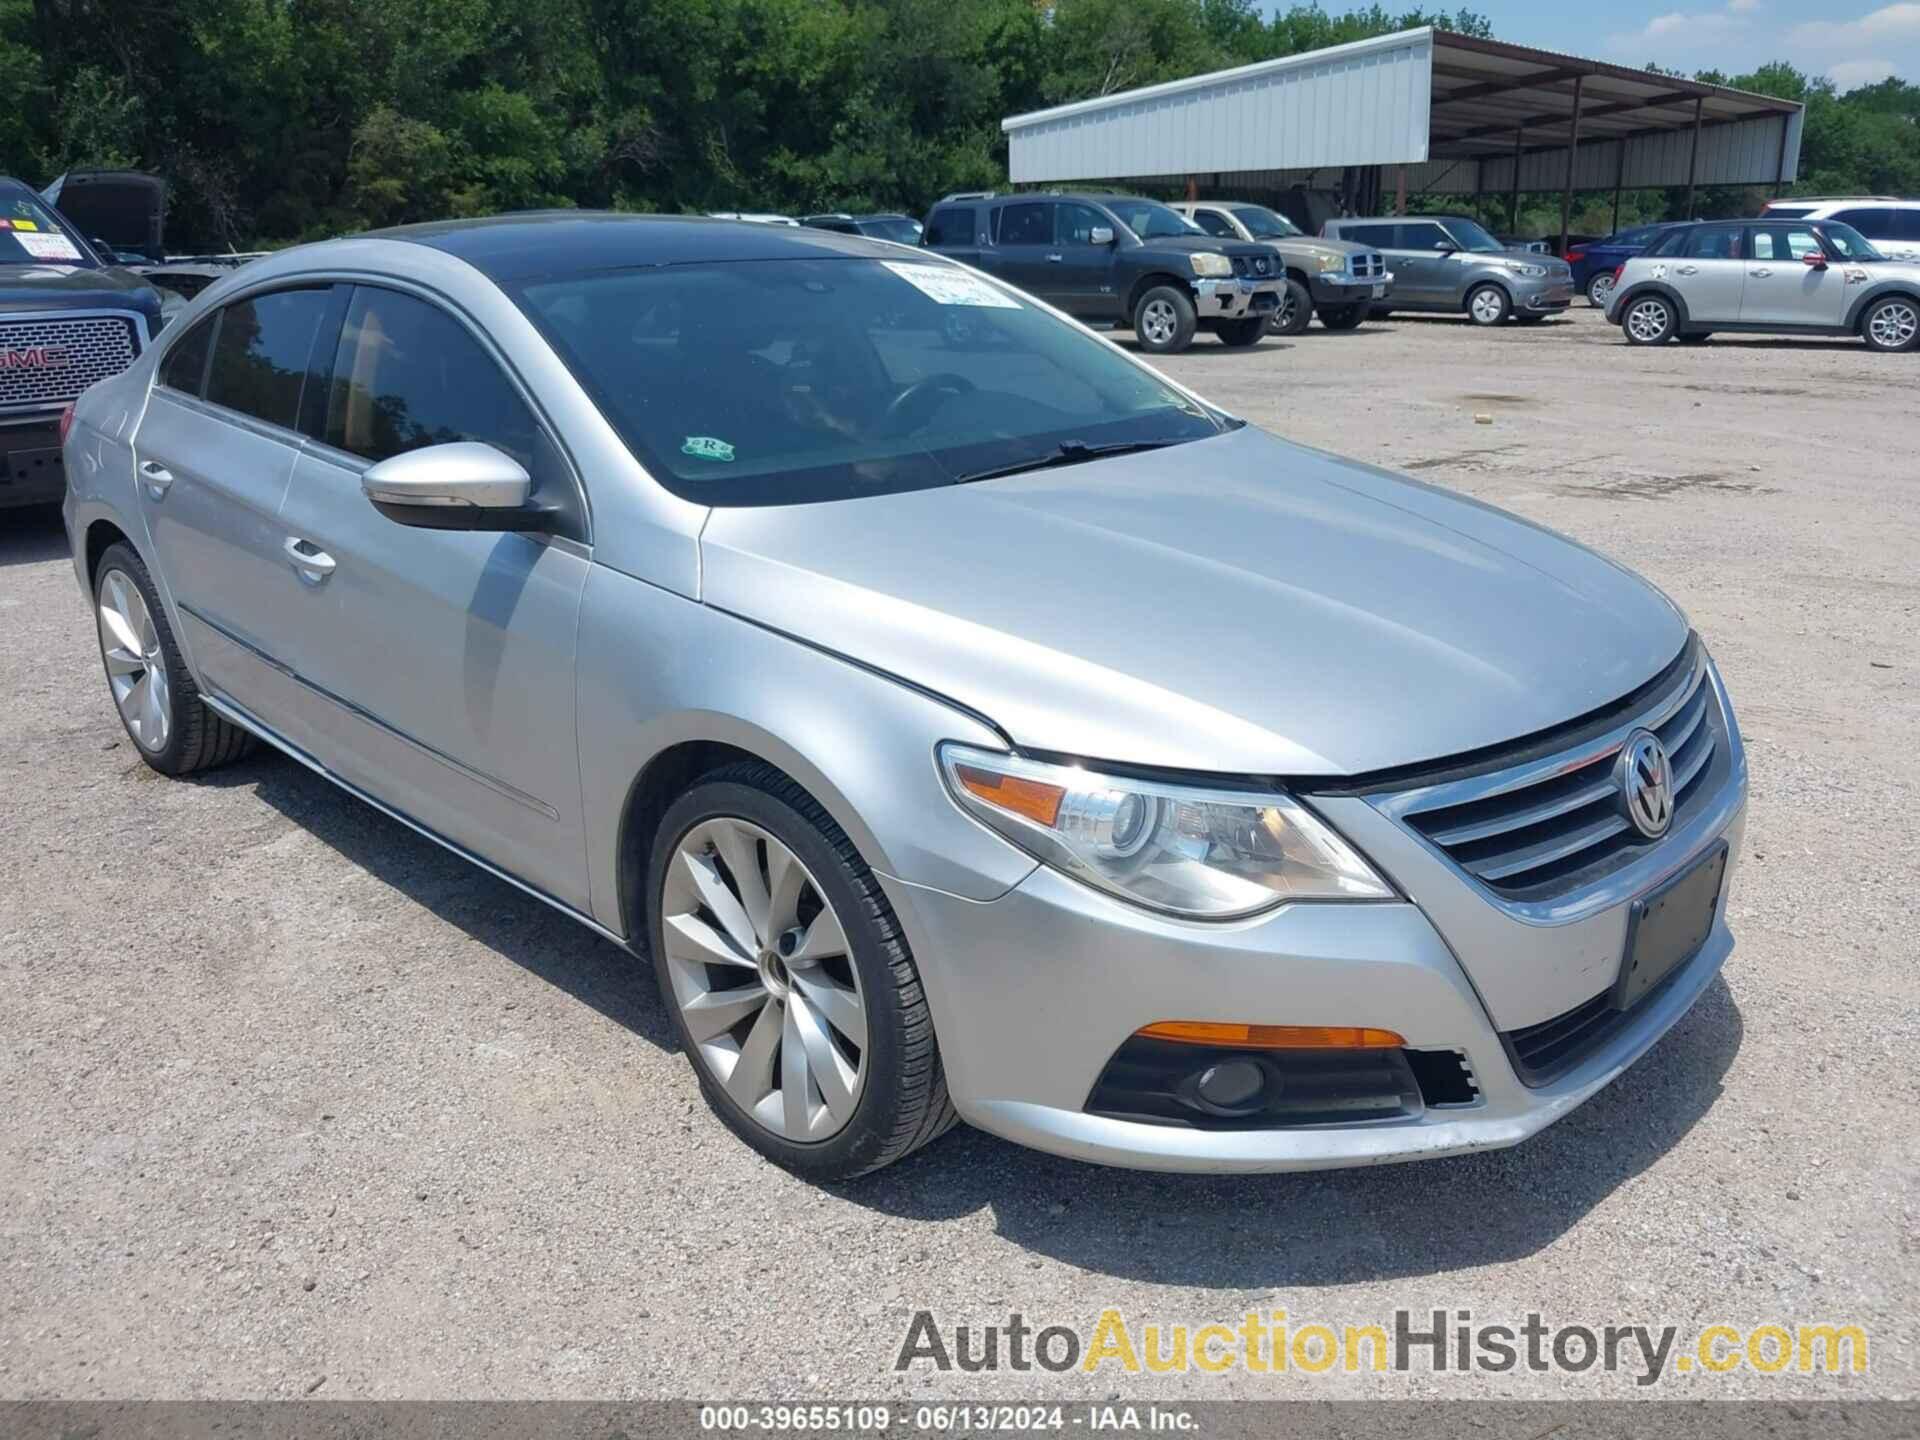 VOLKSWAGEN CC LUX LIMITED, WVWHN7AN8BE727089